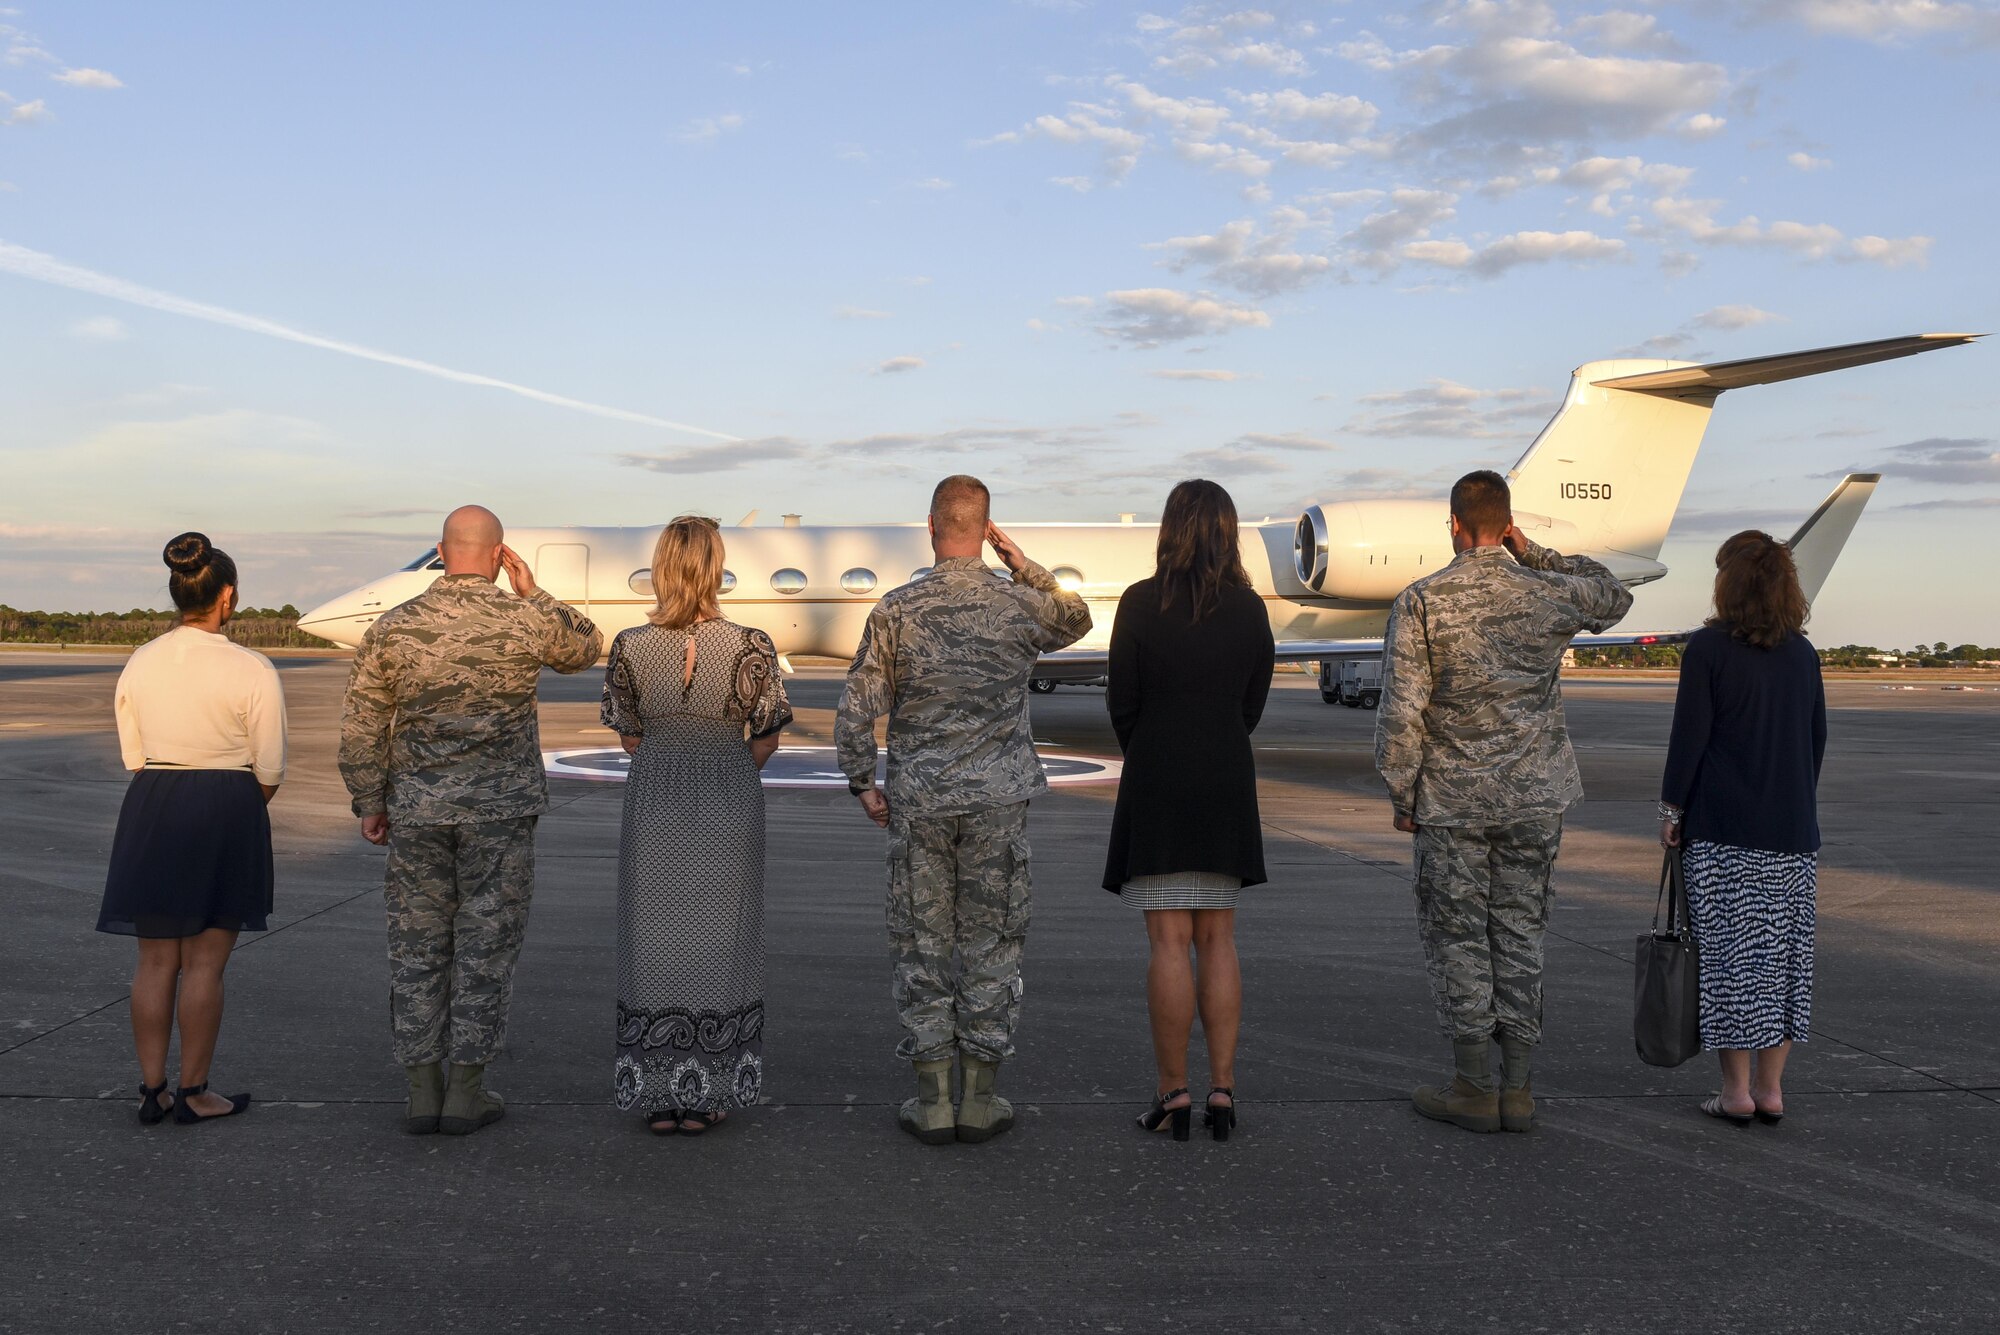 Air Force Special Operations Command and 1st Special Operations Wing leadership salute farewell to Air Force Chief of Staff Gen. David L. Goldfein and his wife, Dawn, as they depart Hurlburt Field, Fla., Oct. 20, 2016. Goldfein was the keynote speaker at a Special Tactics Memorial dedication ceremony at the Hurlburt Field Air Park. In addition, he and his wife met with AFSOC leadership, the 505th Command and Control Wing and Air Commandos around the base. (U.S. Air Force photo by Senior Airman Jeff Parkinson)